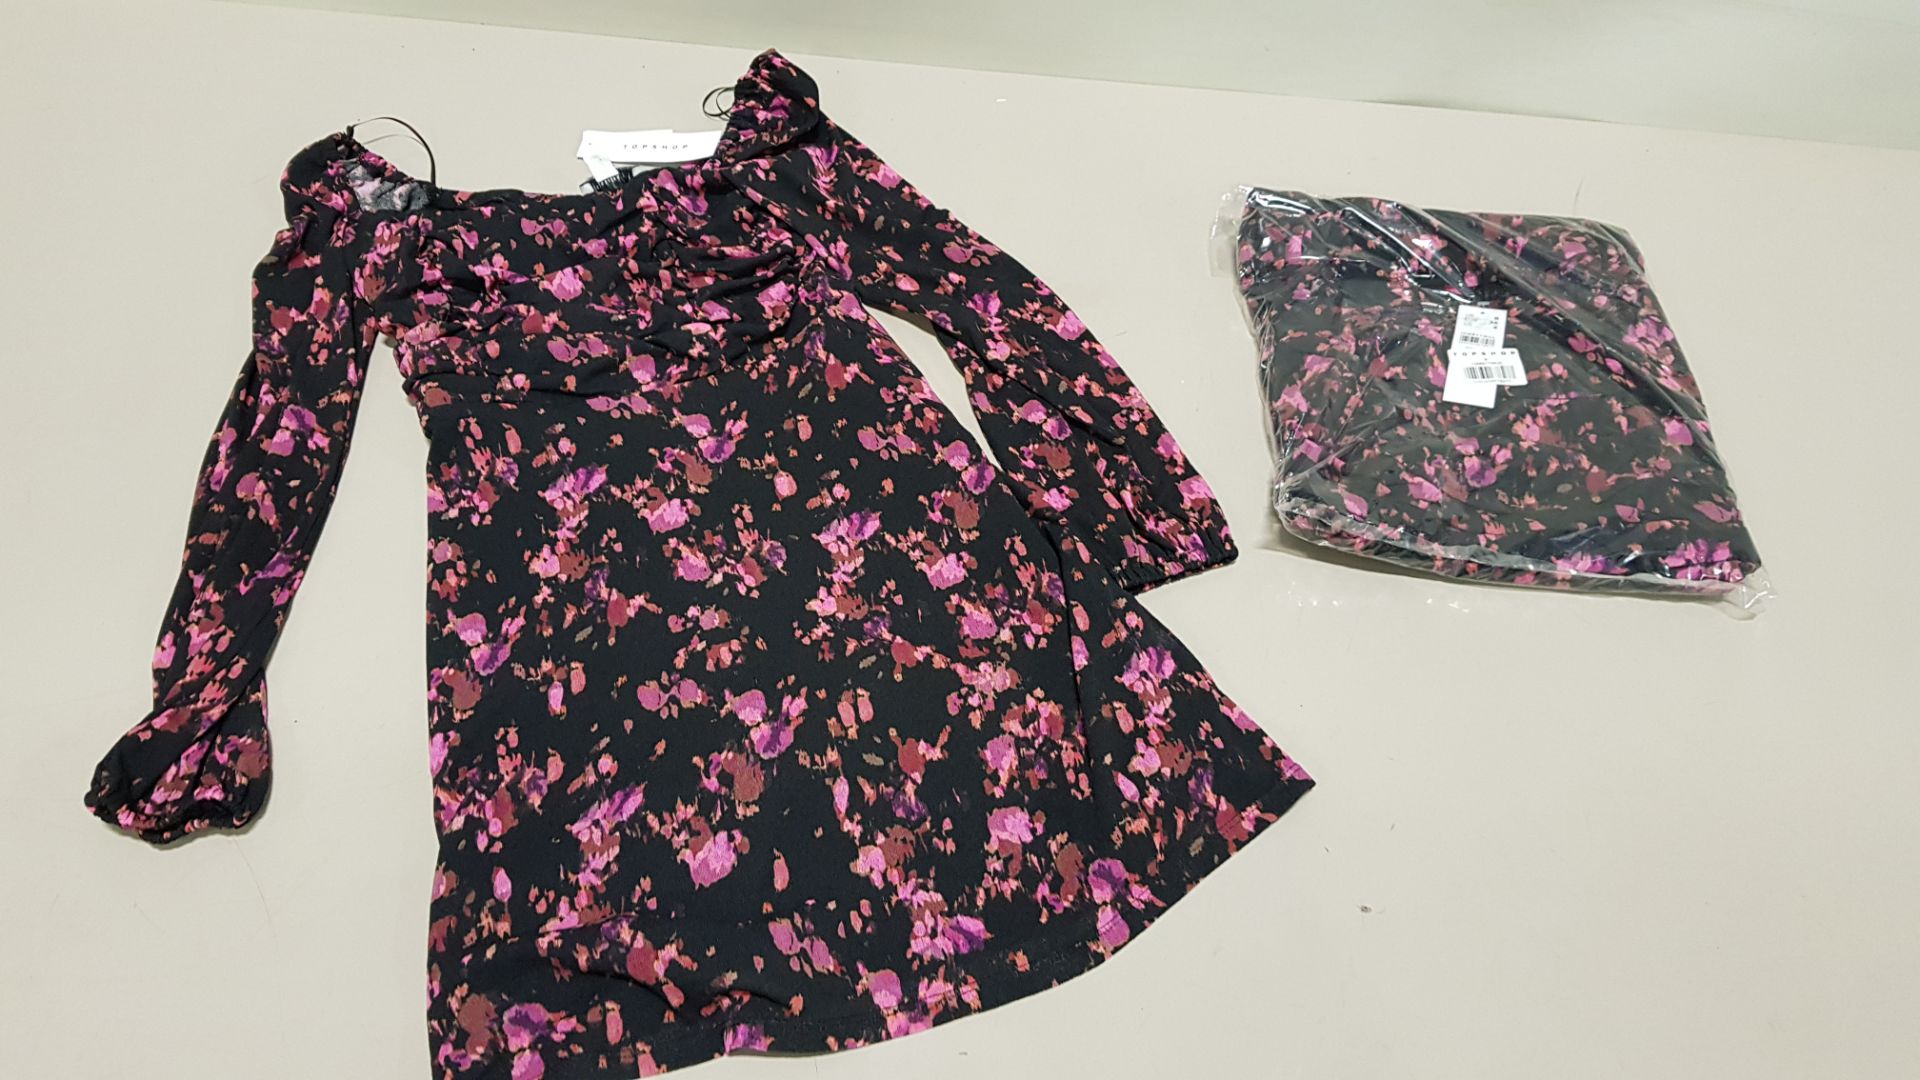 40 X BRAND NEW TOPSHOP MULTI COLOURED MINI DRESSES SIZE 10 AND 12 RRP £25.00 (TOTAL RRP £1000.00)